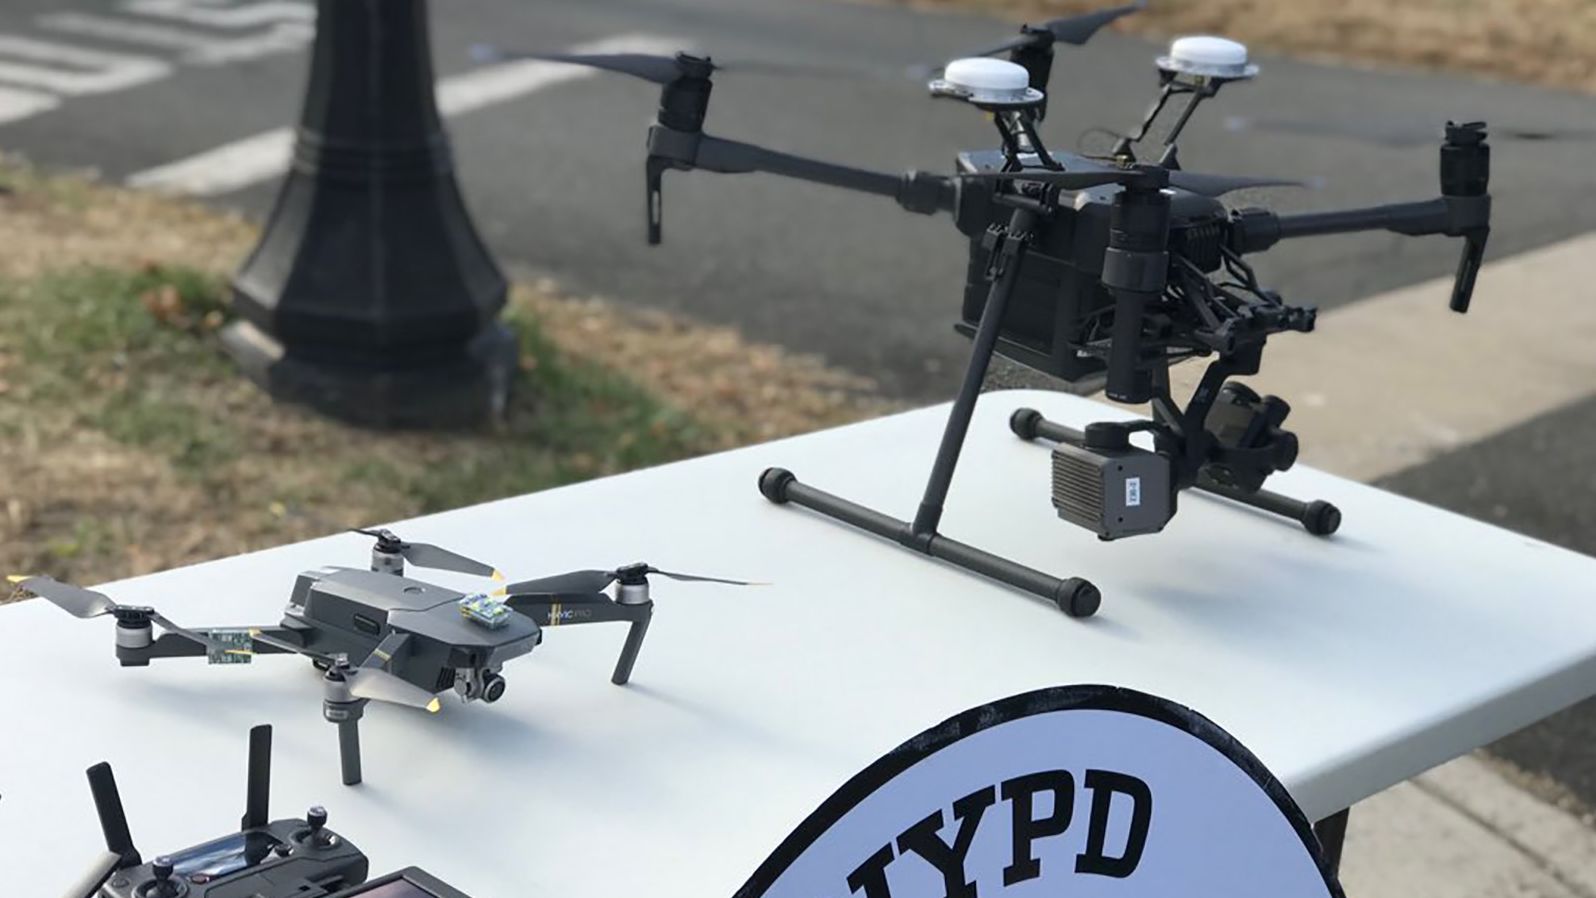 The NYPD unveiled a new drone program